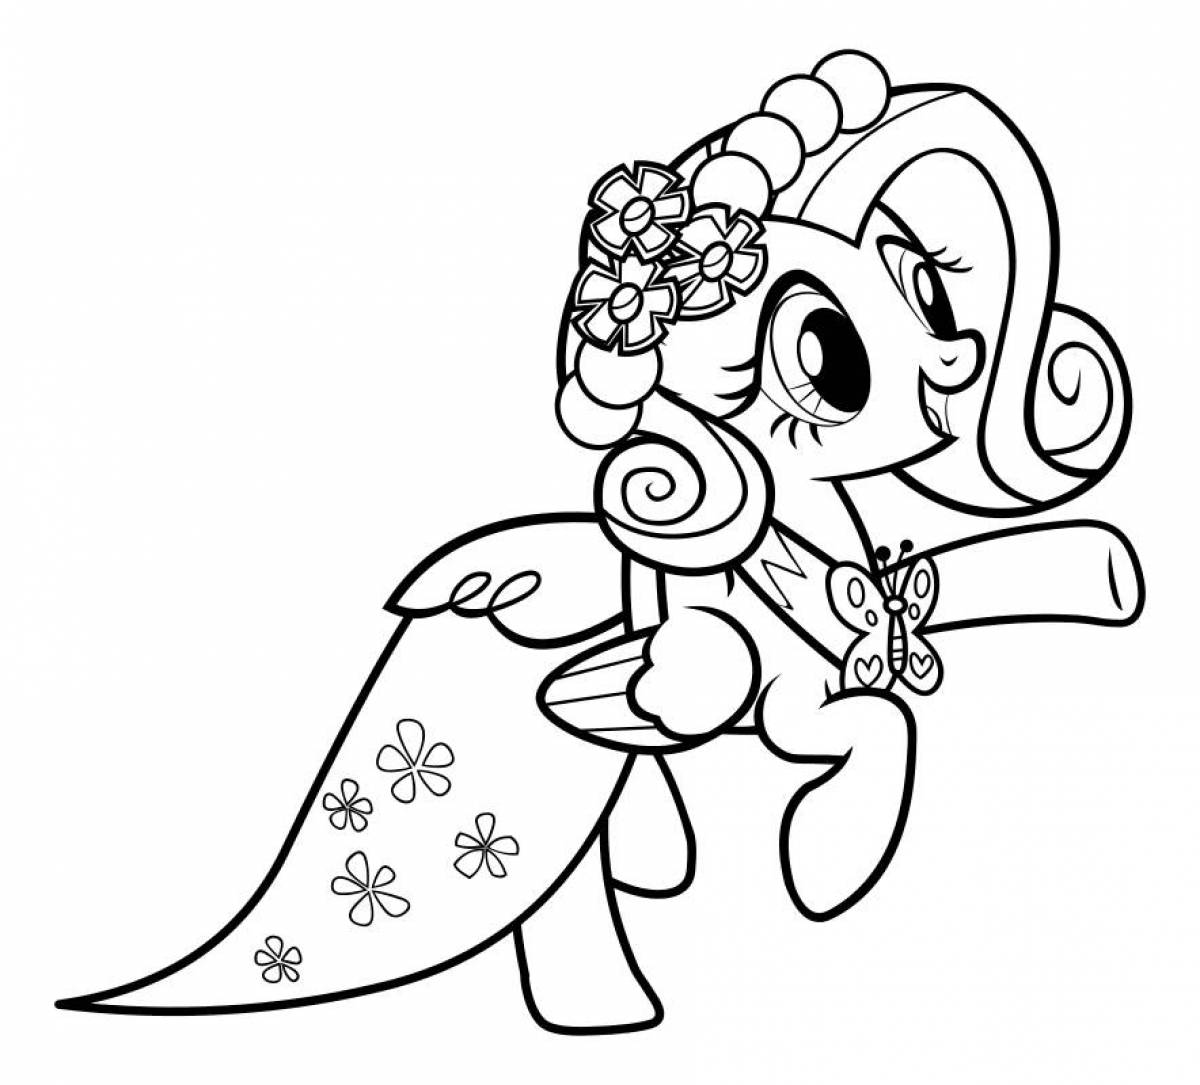 Fluttershy peaceful coloring